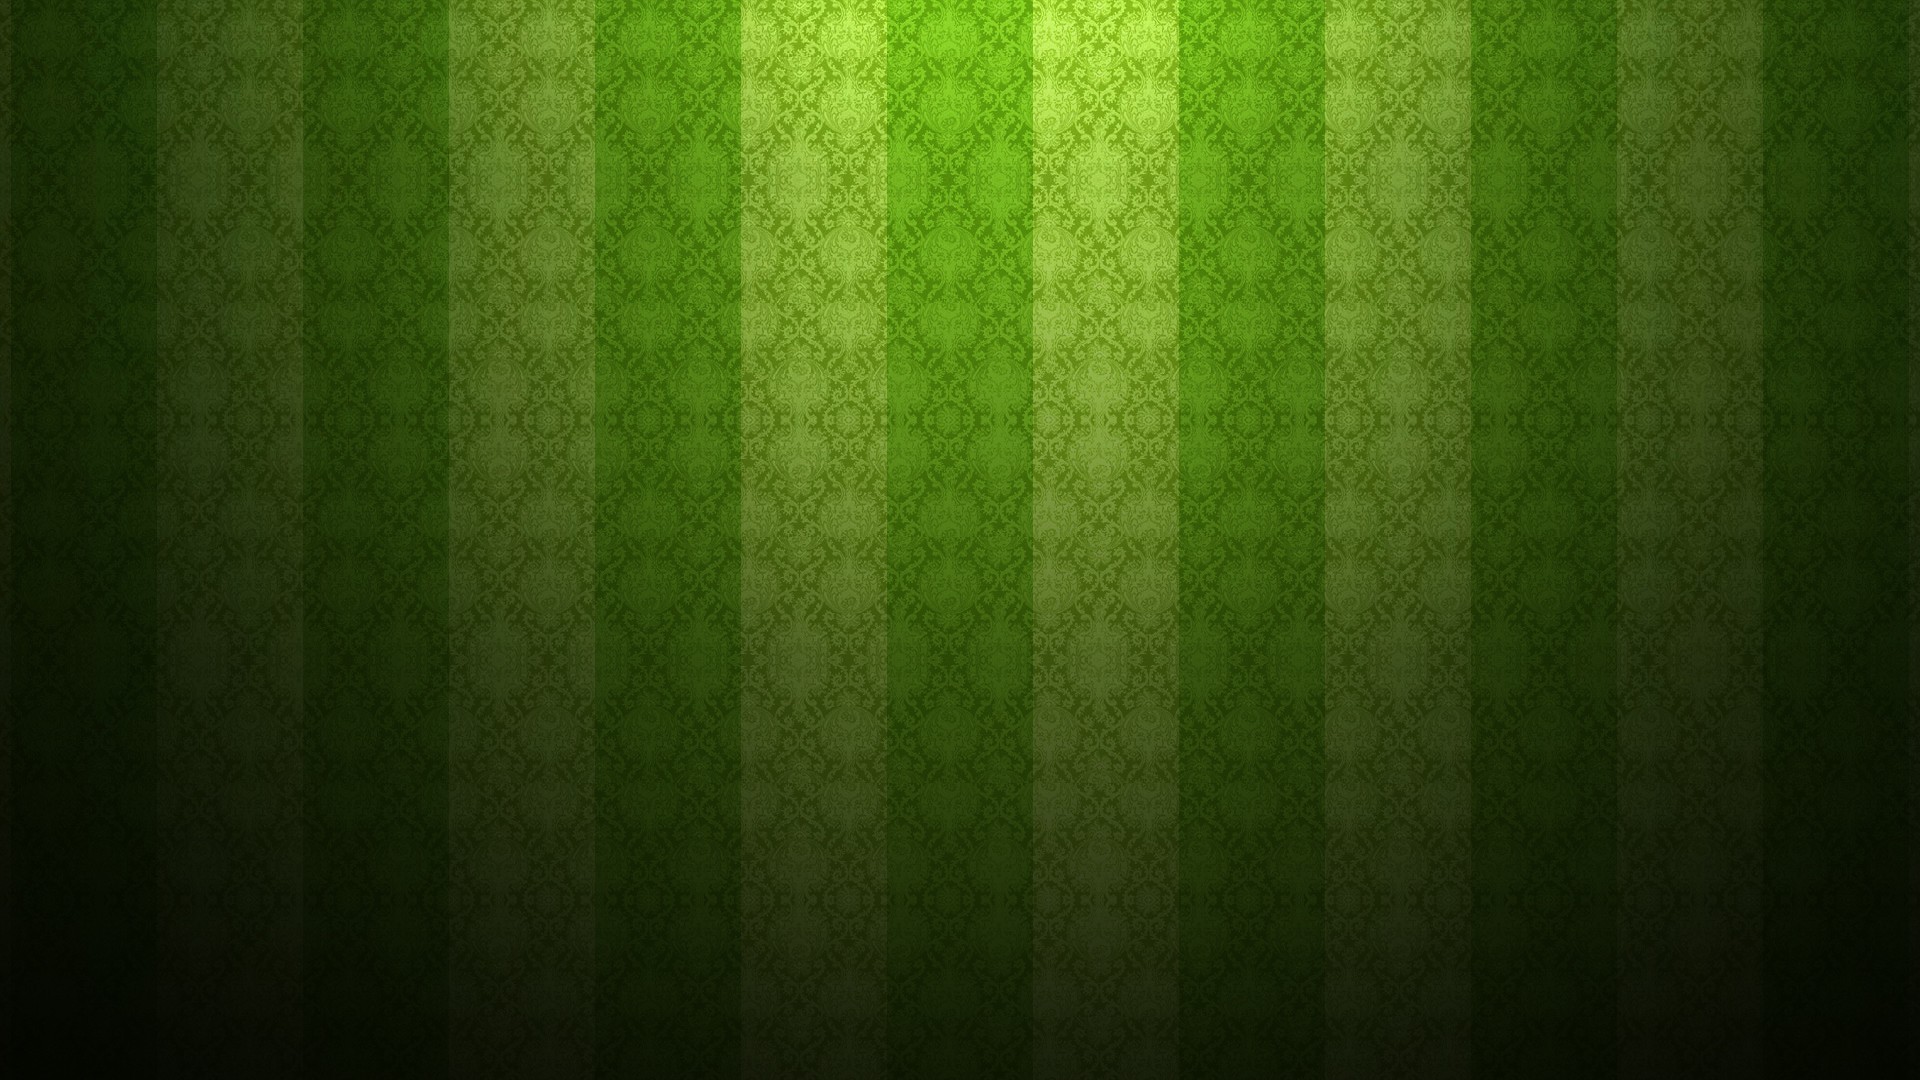 Dark Green Wallpaper HD with image resolution 1920x1080 pixel. You can make this wallpaper for your Desktop Computer Backgrounds, Mac Wallpapers, Android Lock screen or iPhone Screensavers